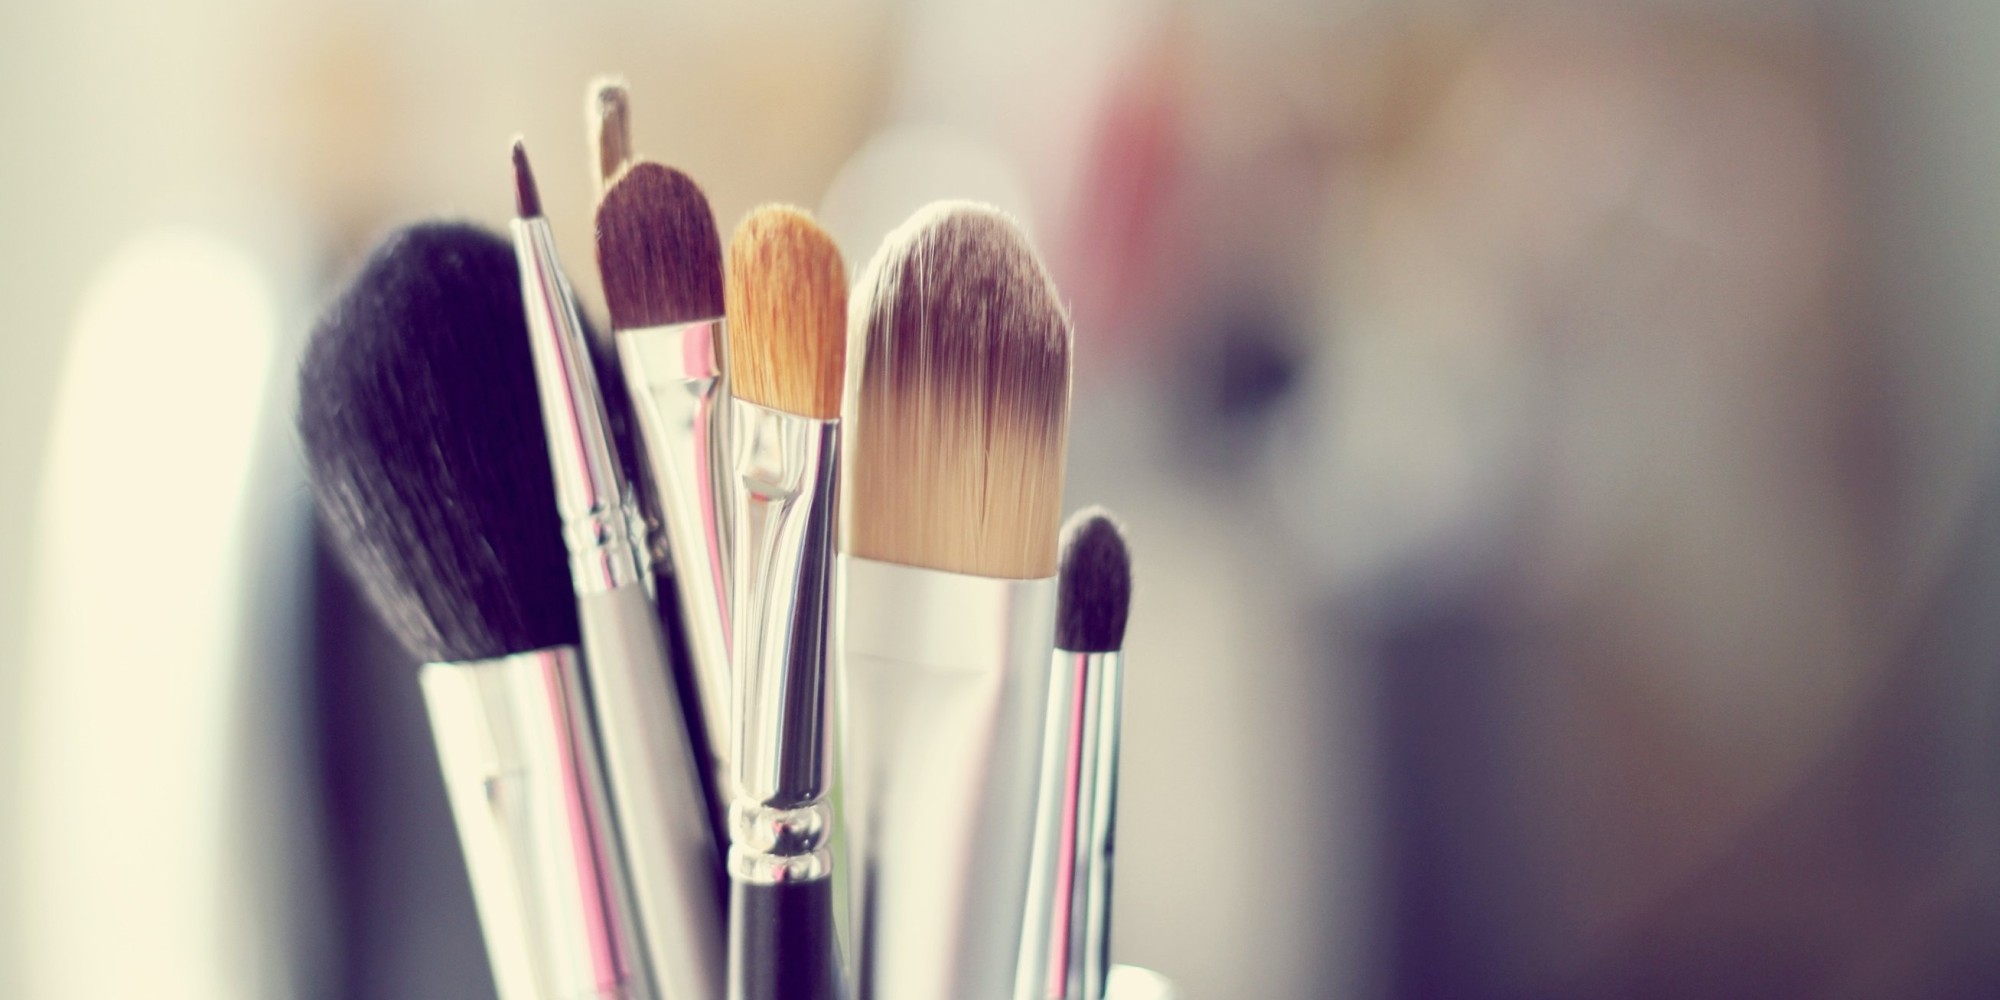 Free download The 5 Makeup Brushes You Should Own How To Use Them [2000x1000] for your Desktop, Mobile & Tablet. Explore Makeup Wallpaper Tumblr Quotes Wallpaper, Cute Makeup Wallpaper, Wallpaper Tumblr